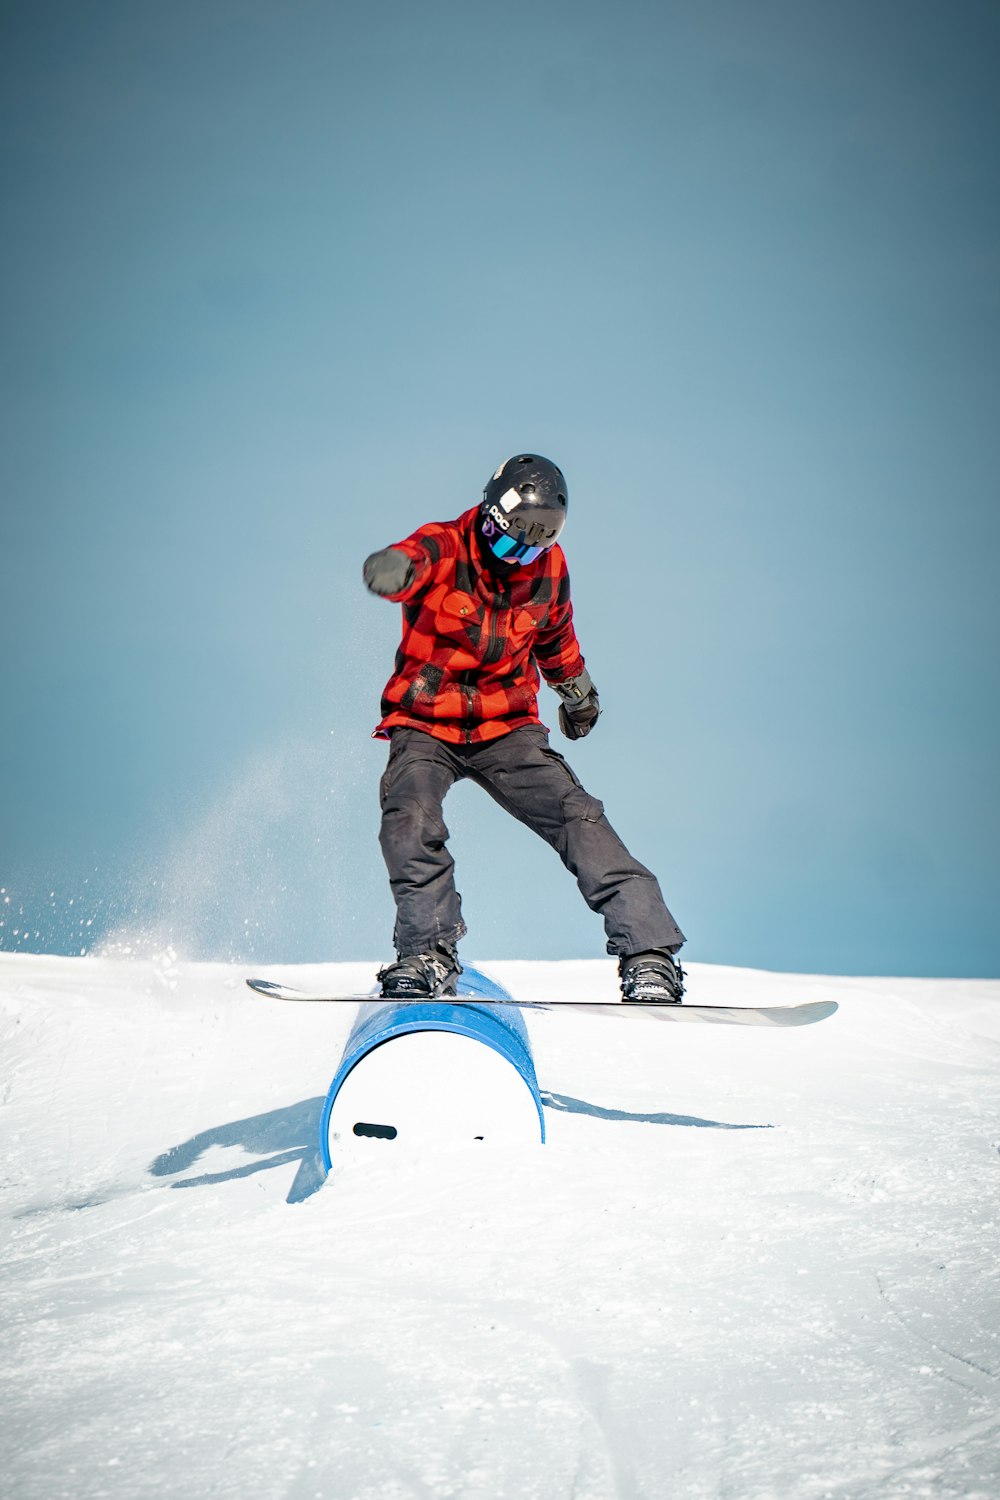 man in red jacket and black pants riding on snowboard